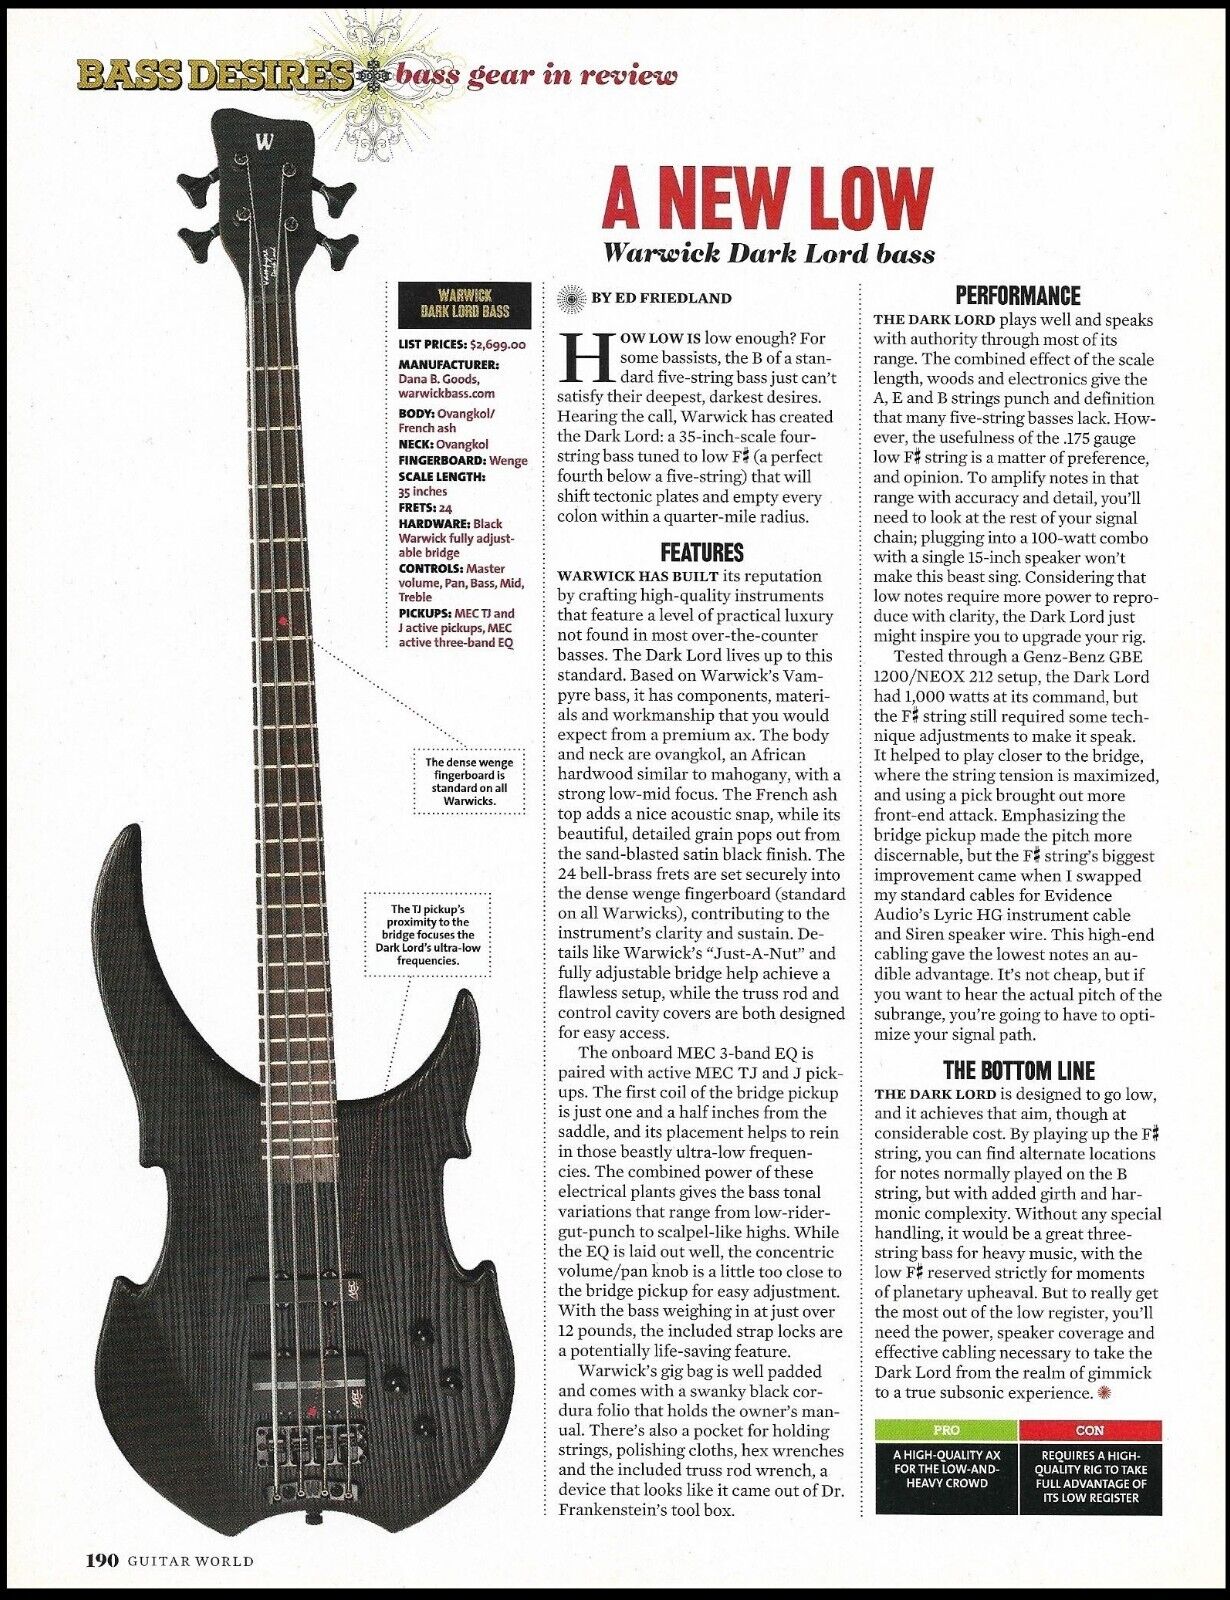 Warwick Dark Lord bass guitar review sound check article print